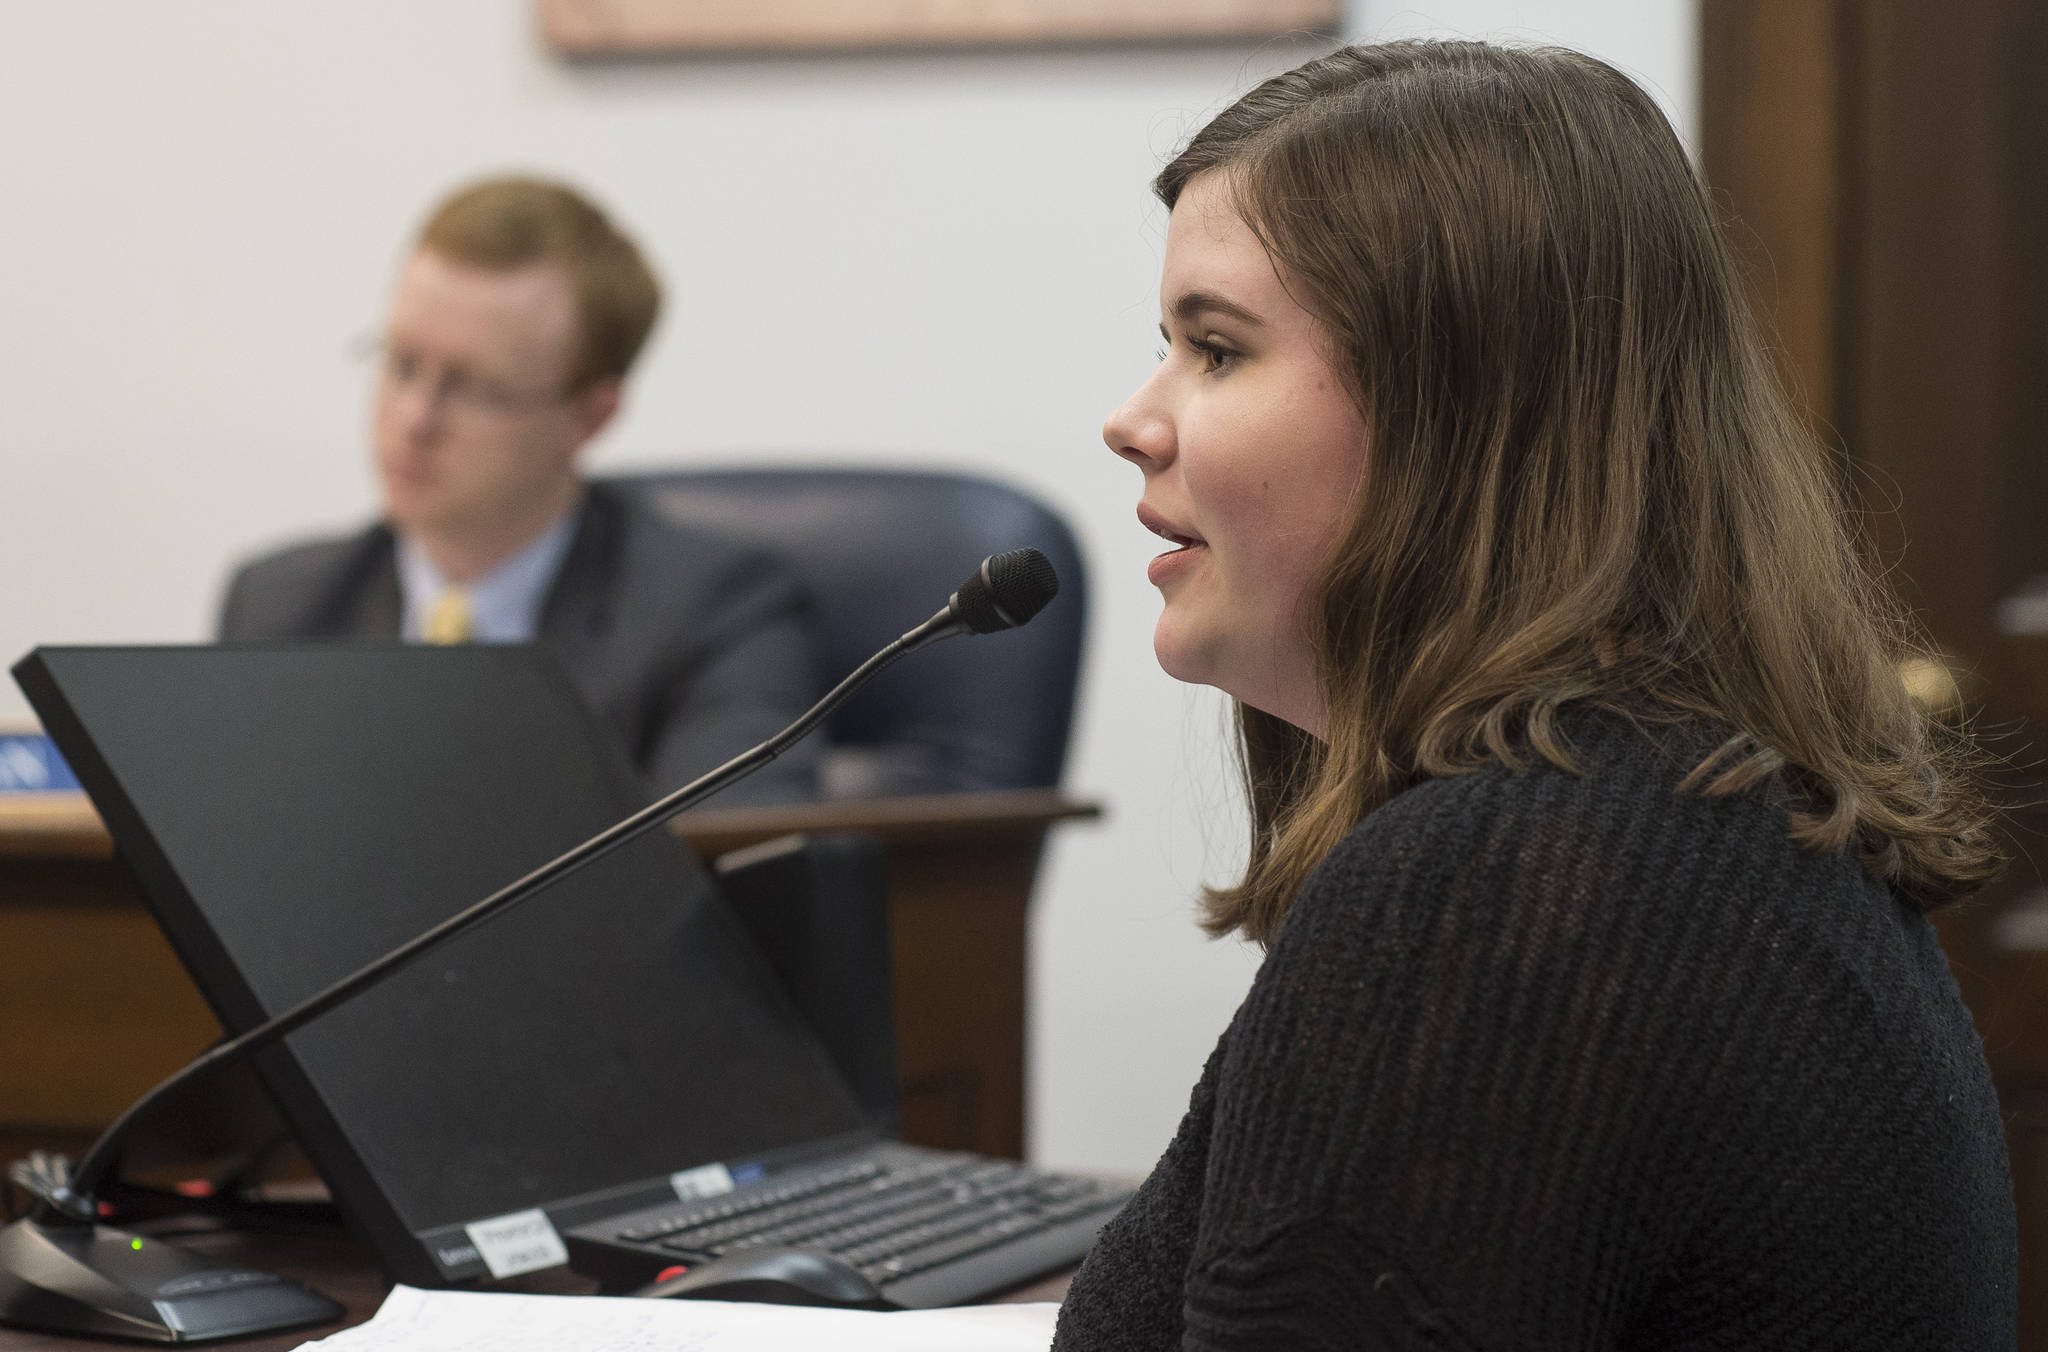 Juneau-Douglas High School sophomore Stella Tallmon testifies in front of the House Judiciary Committee in favor of HB 75, a gun violence protective orders bill, at the Capitol on Wednesday, Feb. 28, 2018. (Michael Penn | Juneau Empire)